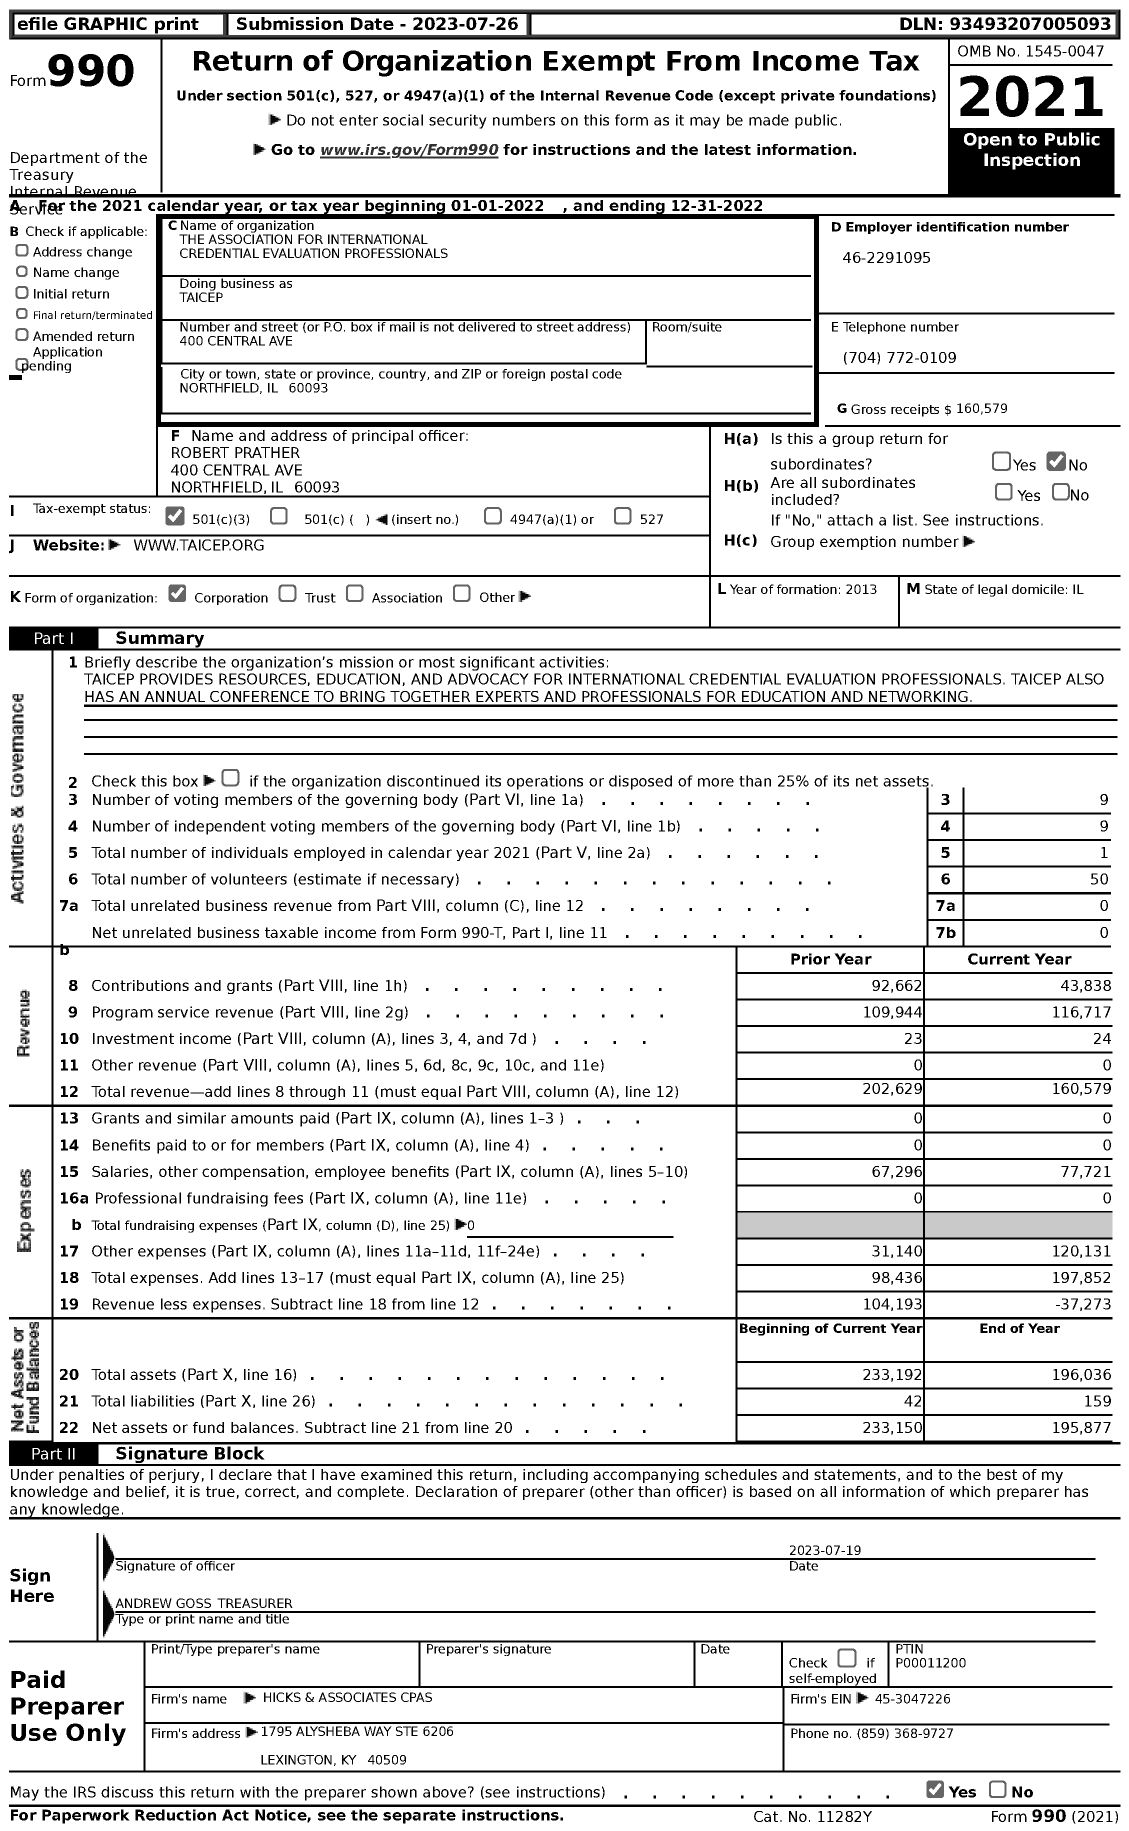 Image of first page of 2022 Form 990 for The Association for International Credential Evaluation Professionals (TAICEP)